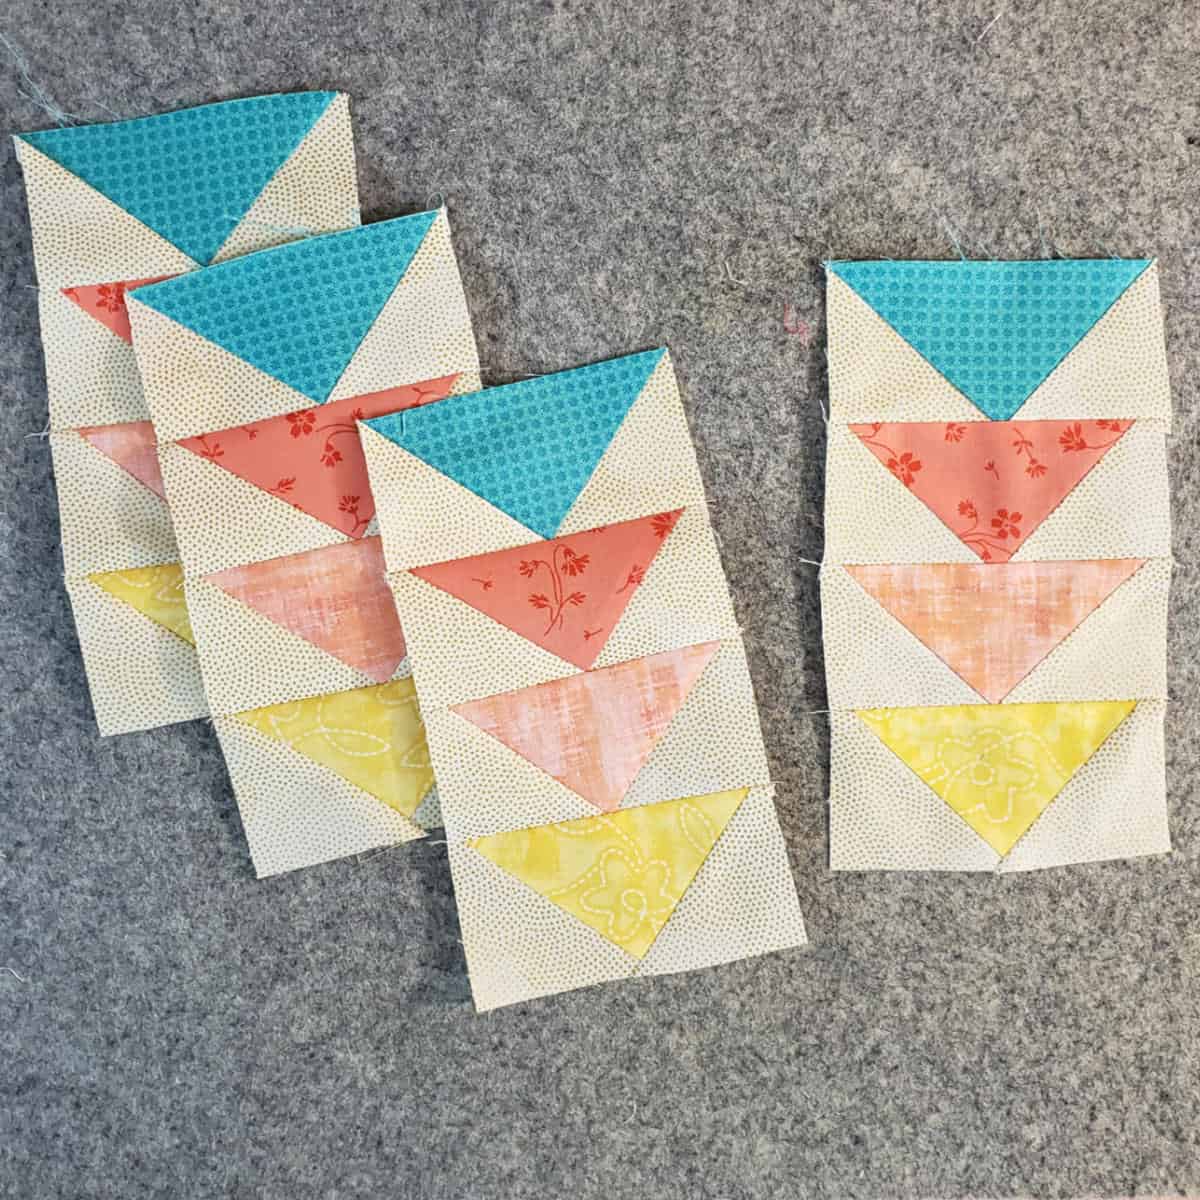 Flying Geese quilt block 4 at a time